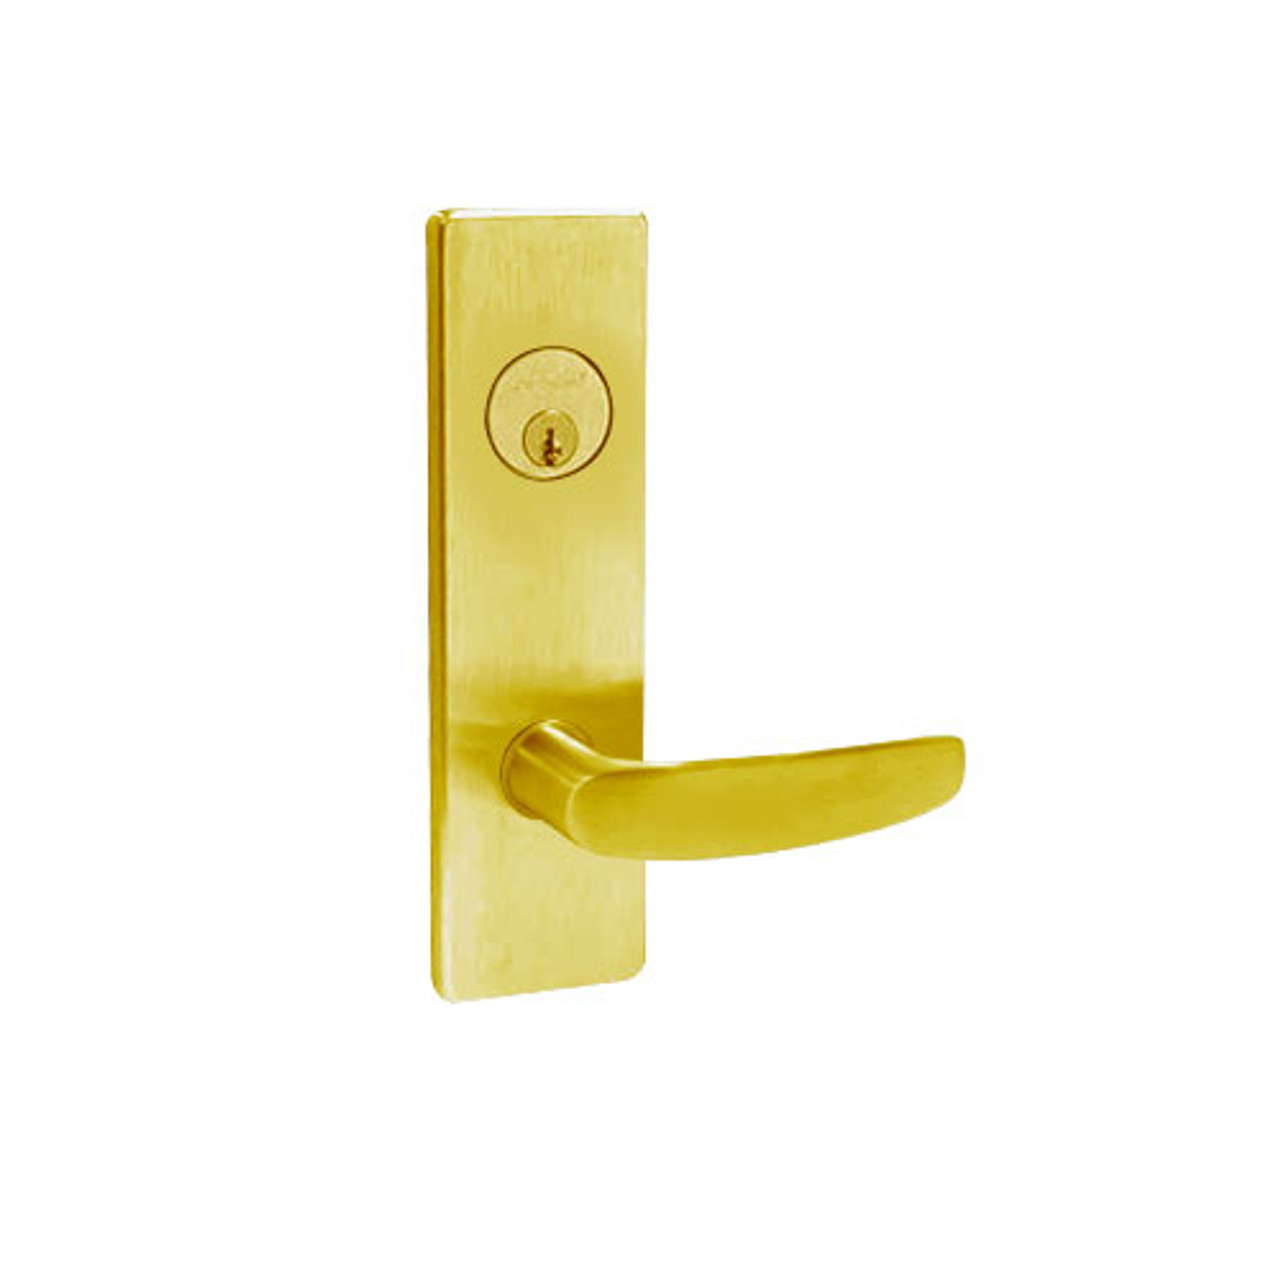 MA411P-AN-605 Falcon Mortise Locks MA Series Asylum AN Lever with Escutcheon Style in Bright Brass Finish